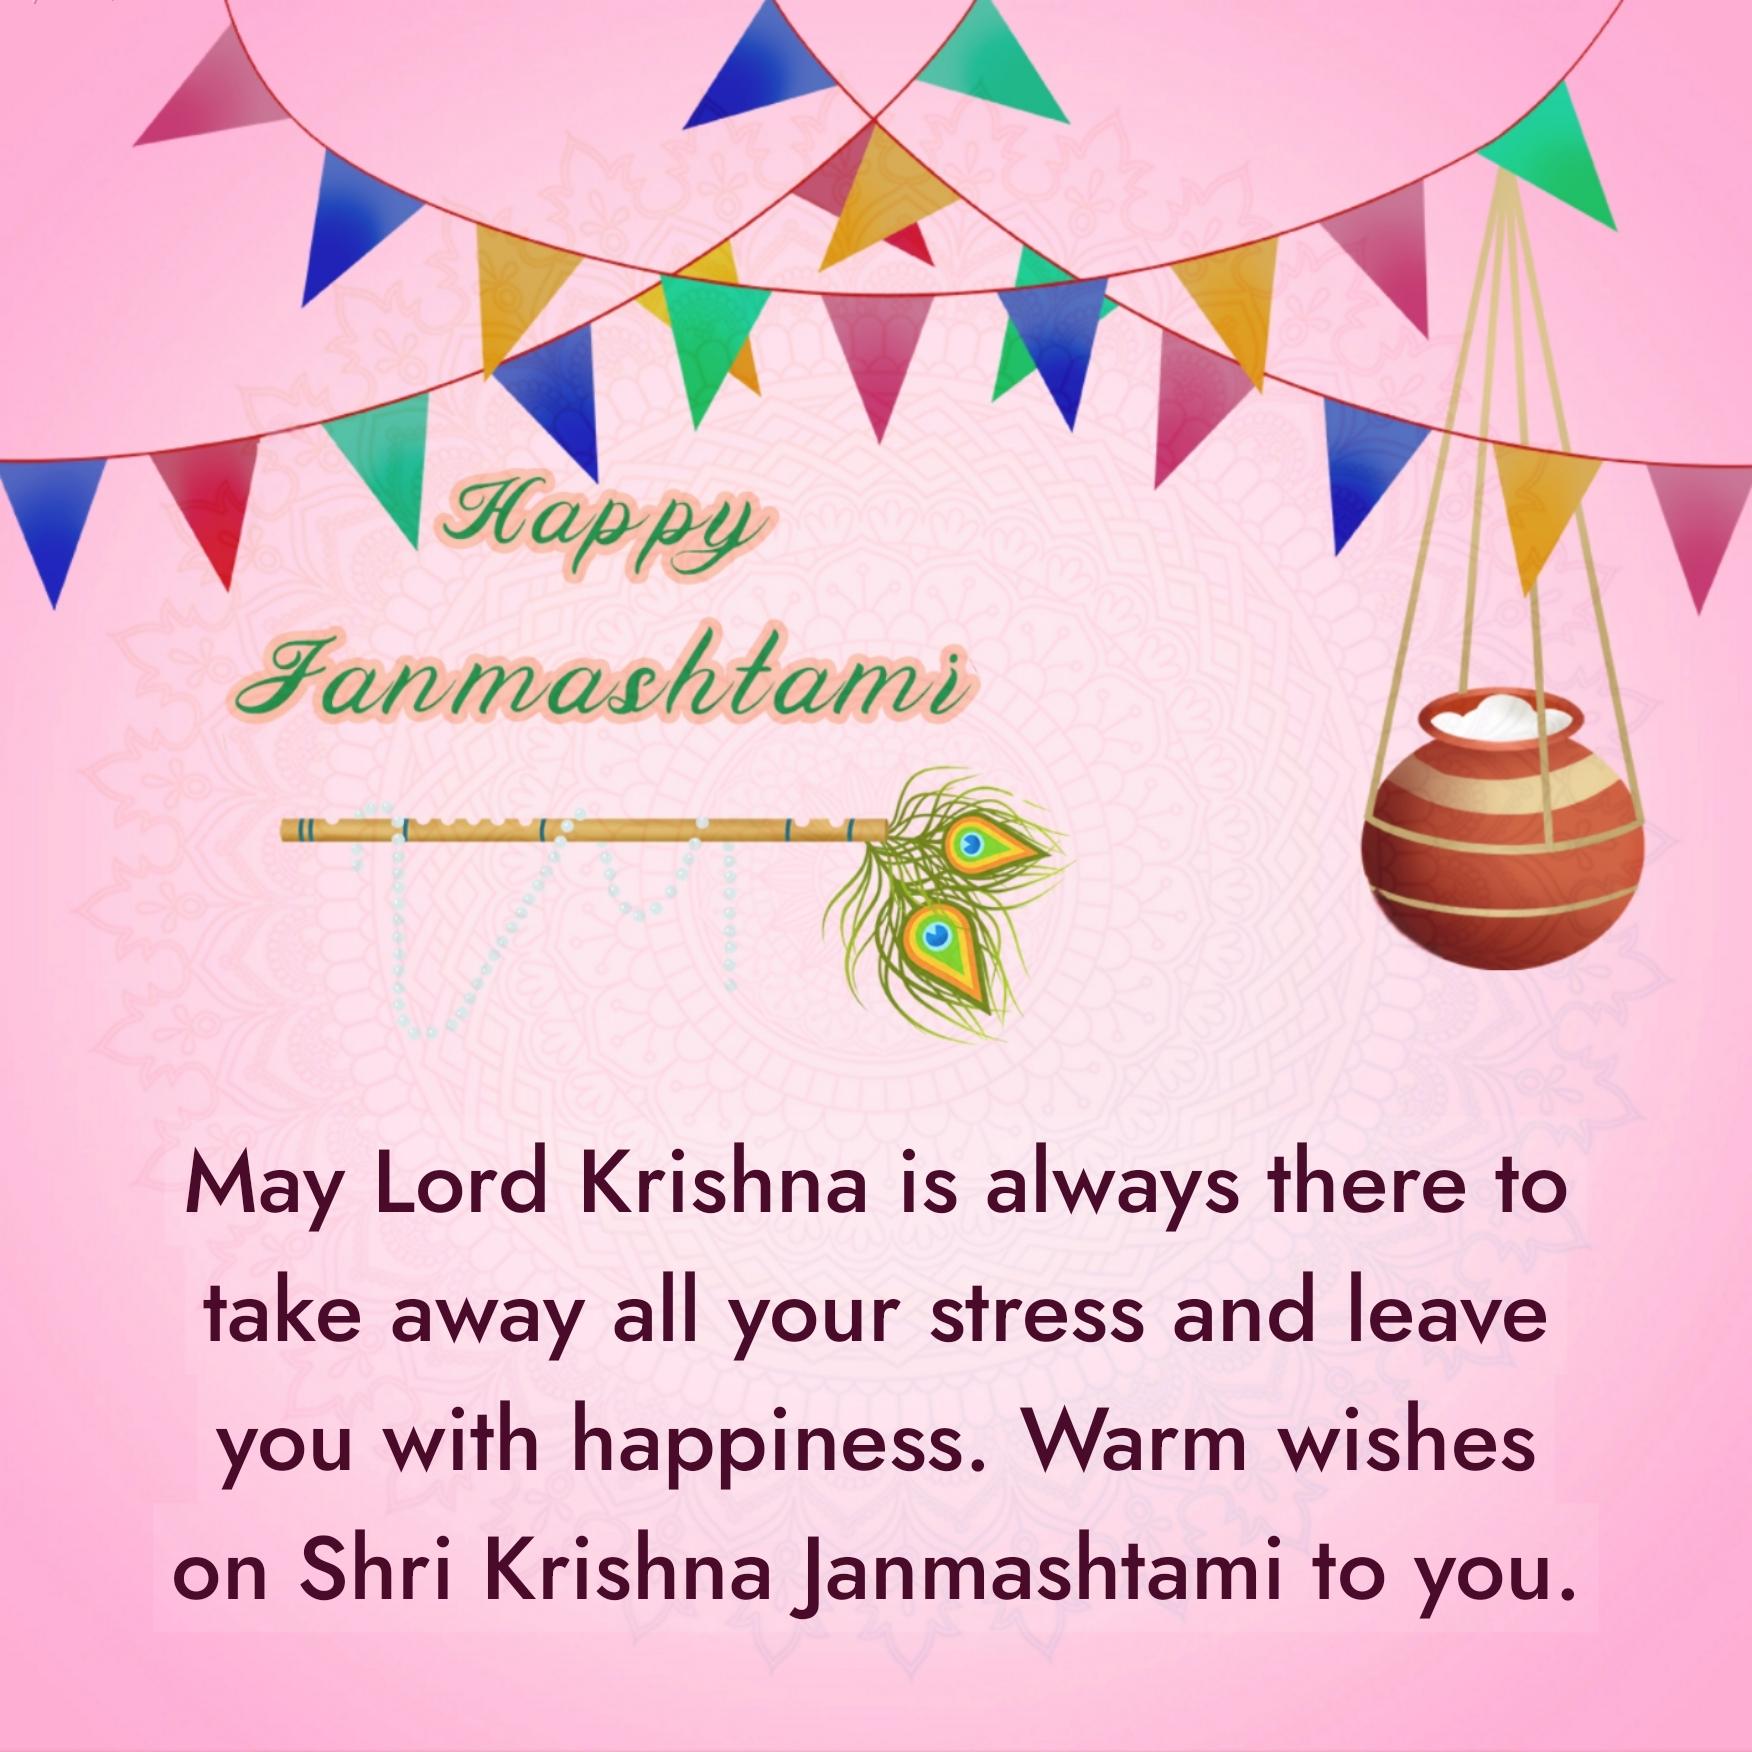 May Lord Krishna is always there to take away all your stress